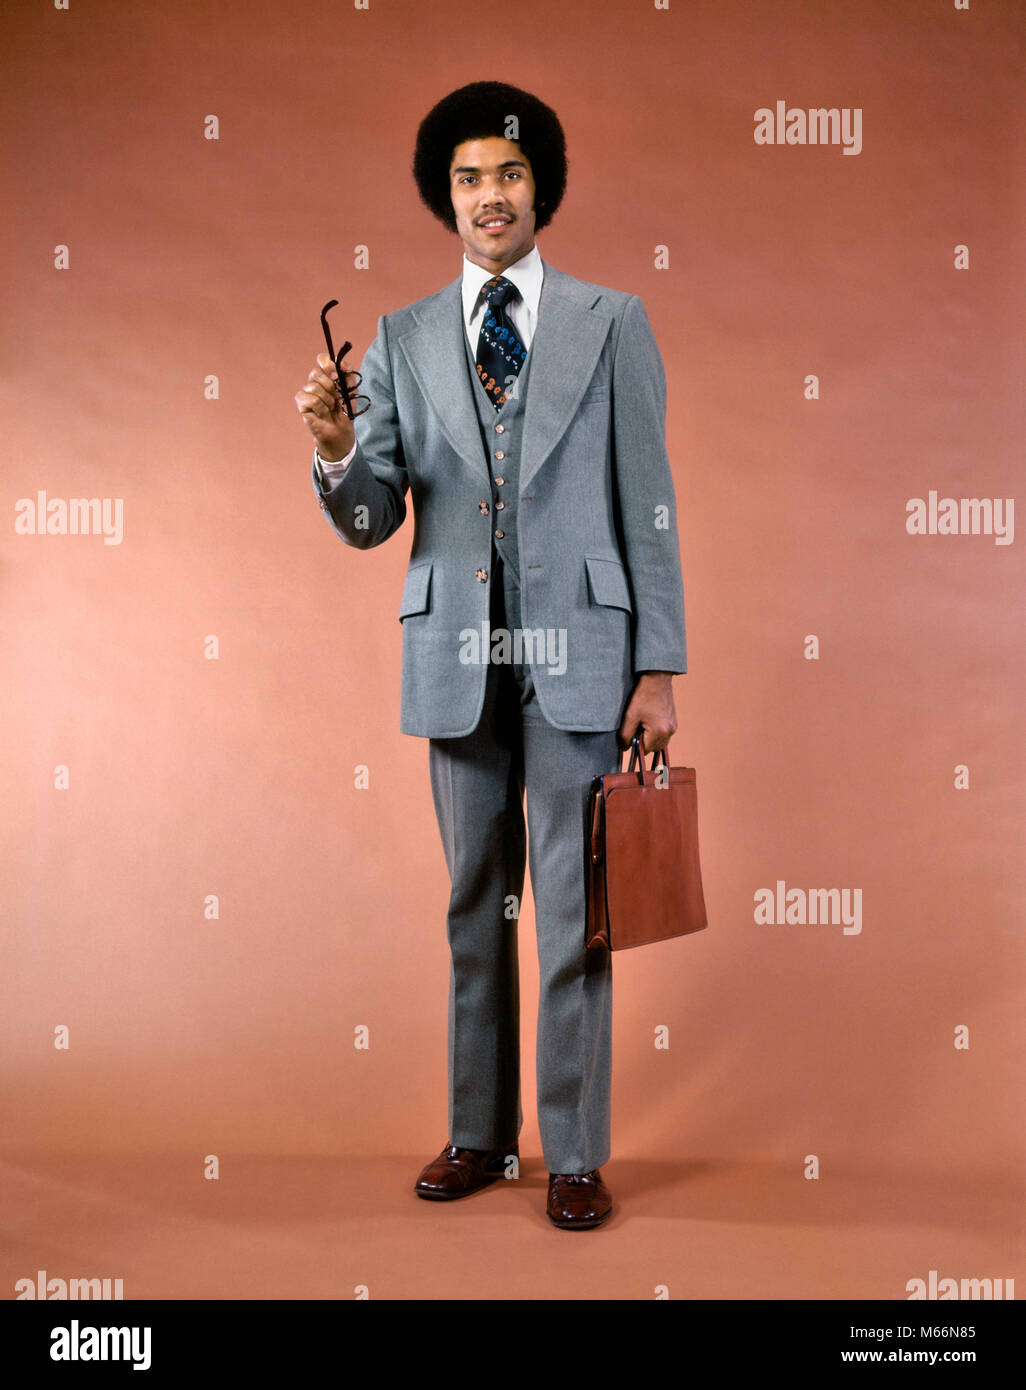 1970s SMILING AFRICAN AMERICAN MAN THREE PIECE SUIT BRIEFCASE LOOKING AT CAMERA POINTING GESTURING WITH EYEGLASSES - ks12055 HAR001 HARS STYLISH COLLAR COLOR EXECUTIVE OLD TIME INDUSTRY OLD FASHION 1 STYLE CAREER YOUNG ADULT SUITS PIECE PLEASED JOY LIFESTYLE SALESPERSON STUDIO SHOT PORTRAITS GROWNUP ONE PERSON ONLY COPY SPACE FULL-LENGTH GROWN-UP AFRO INDOORS PLAID PROFESSION CONFIDENCE EYEGLASSES VEST NOSTALGIA WIDE EYE CONTACT 20-25 YEARS 25-30 YEARS GOALS MUSTACHE WHITE COLLAR OCCUPATION SELLING HAPPINESS STYLES AFRICAN-AMERICANS AFRICAN-AMERICAN SUCCESSFUL TRIO ETHNIC BLACK BLACK ETHNICITY Stock Photo